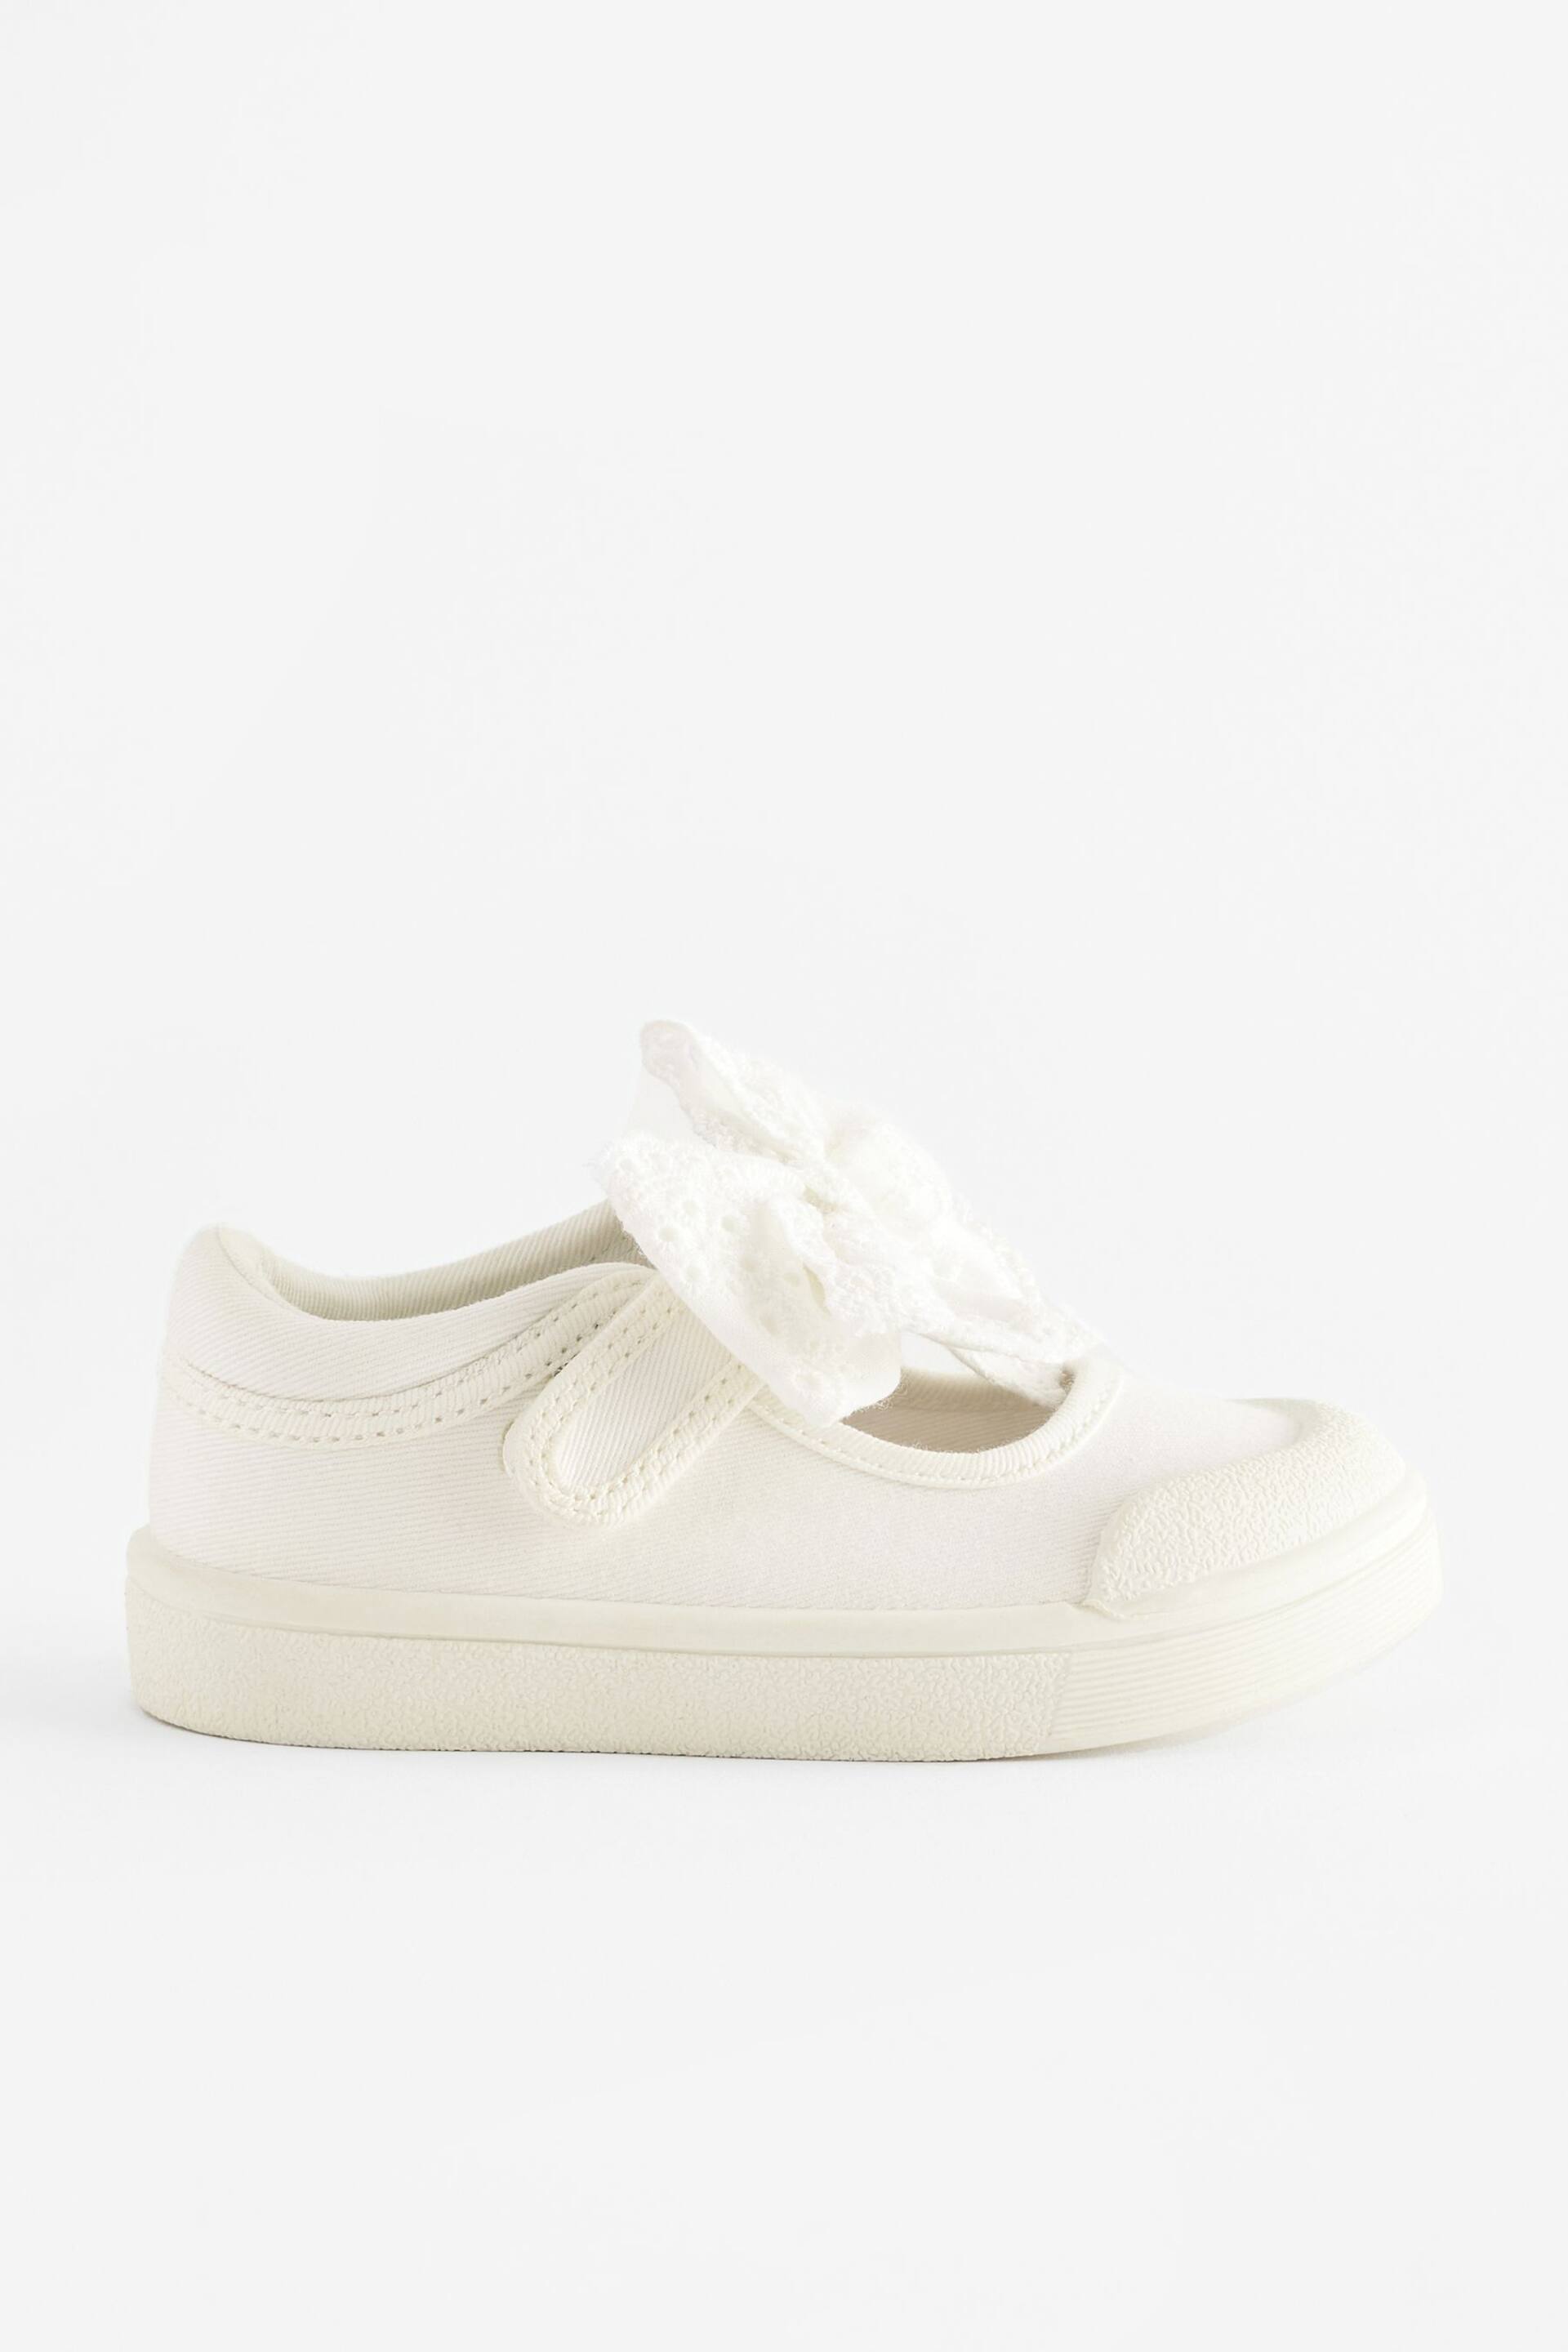 White Standard Fit (F) Machine Washable Mary Jane Shoes - Image 2 of 6